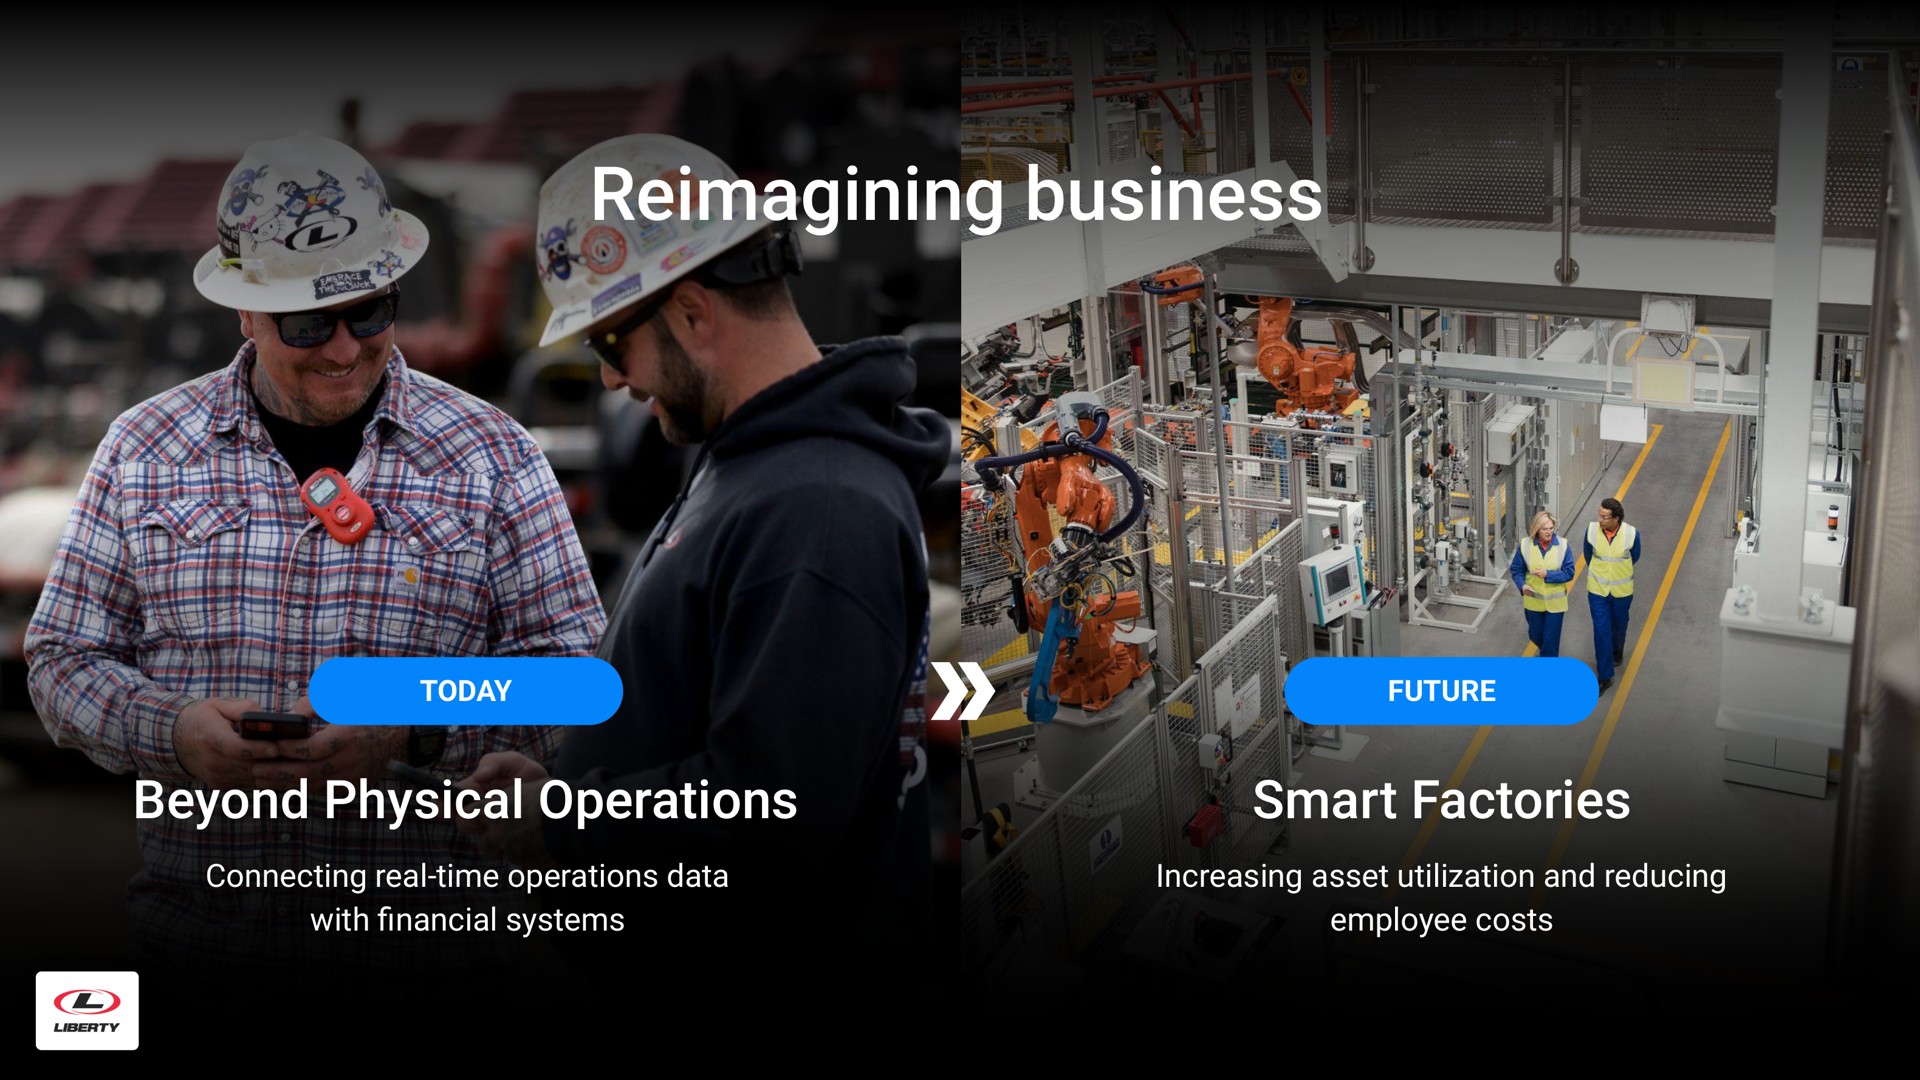 business today future beyond physical operations smart factories connecting real time operations data with systems increasing asset utilization and reducing employee costs | Samsara